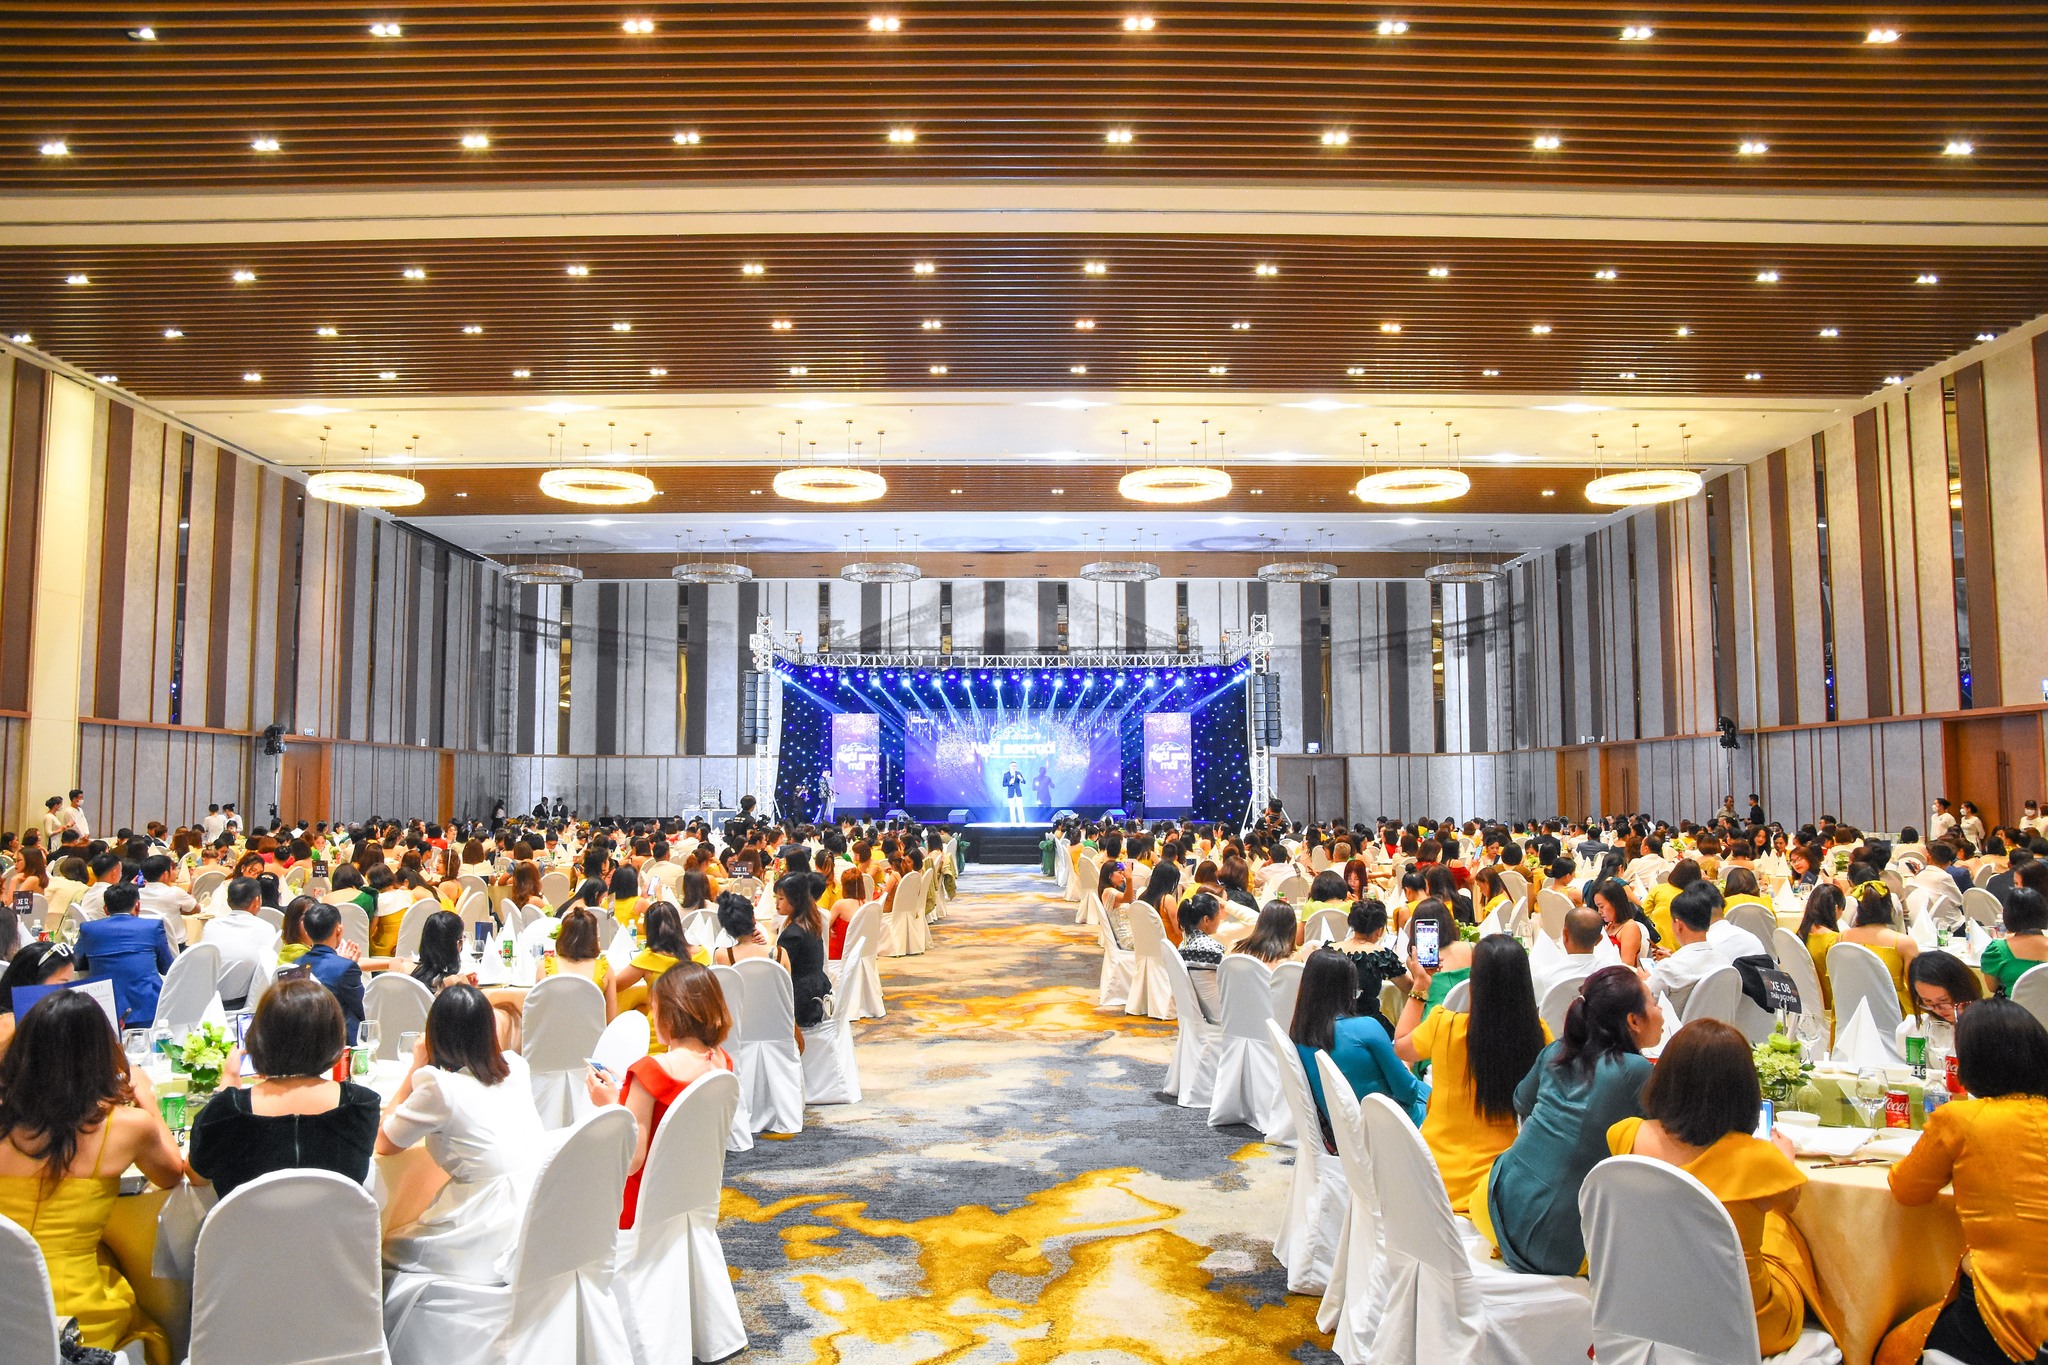 GALA DINNER “DAI VIET’S GOT TALENT” WITH NEARLY 1000 GUESTS ARIYANA CONVENTION CENTRE DANANG